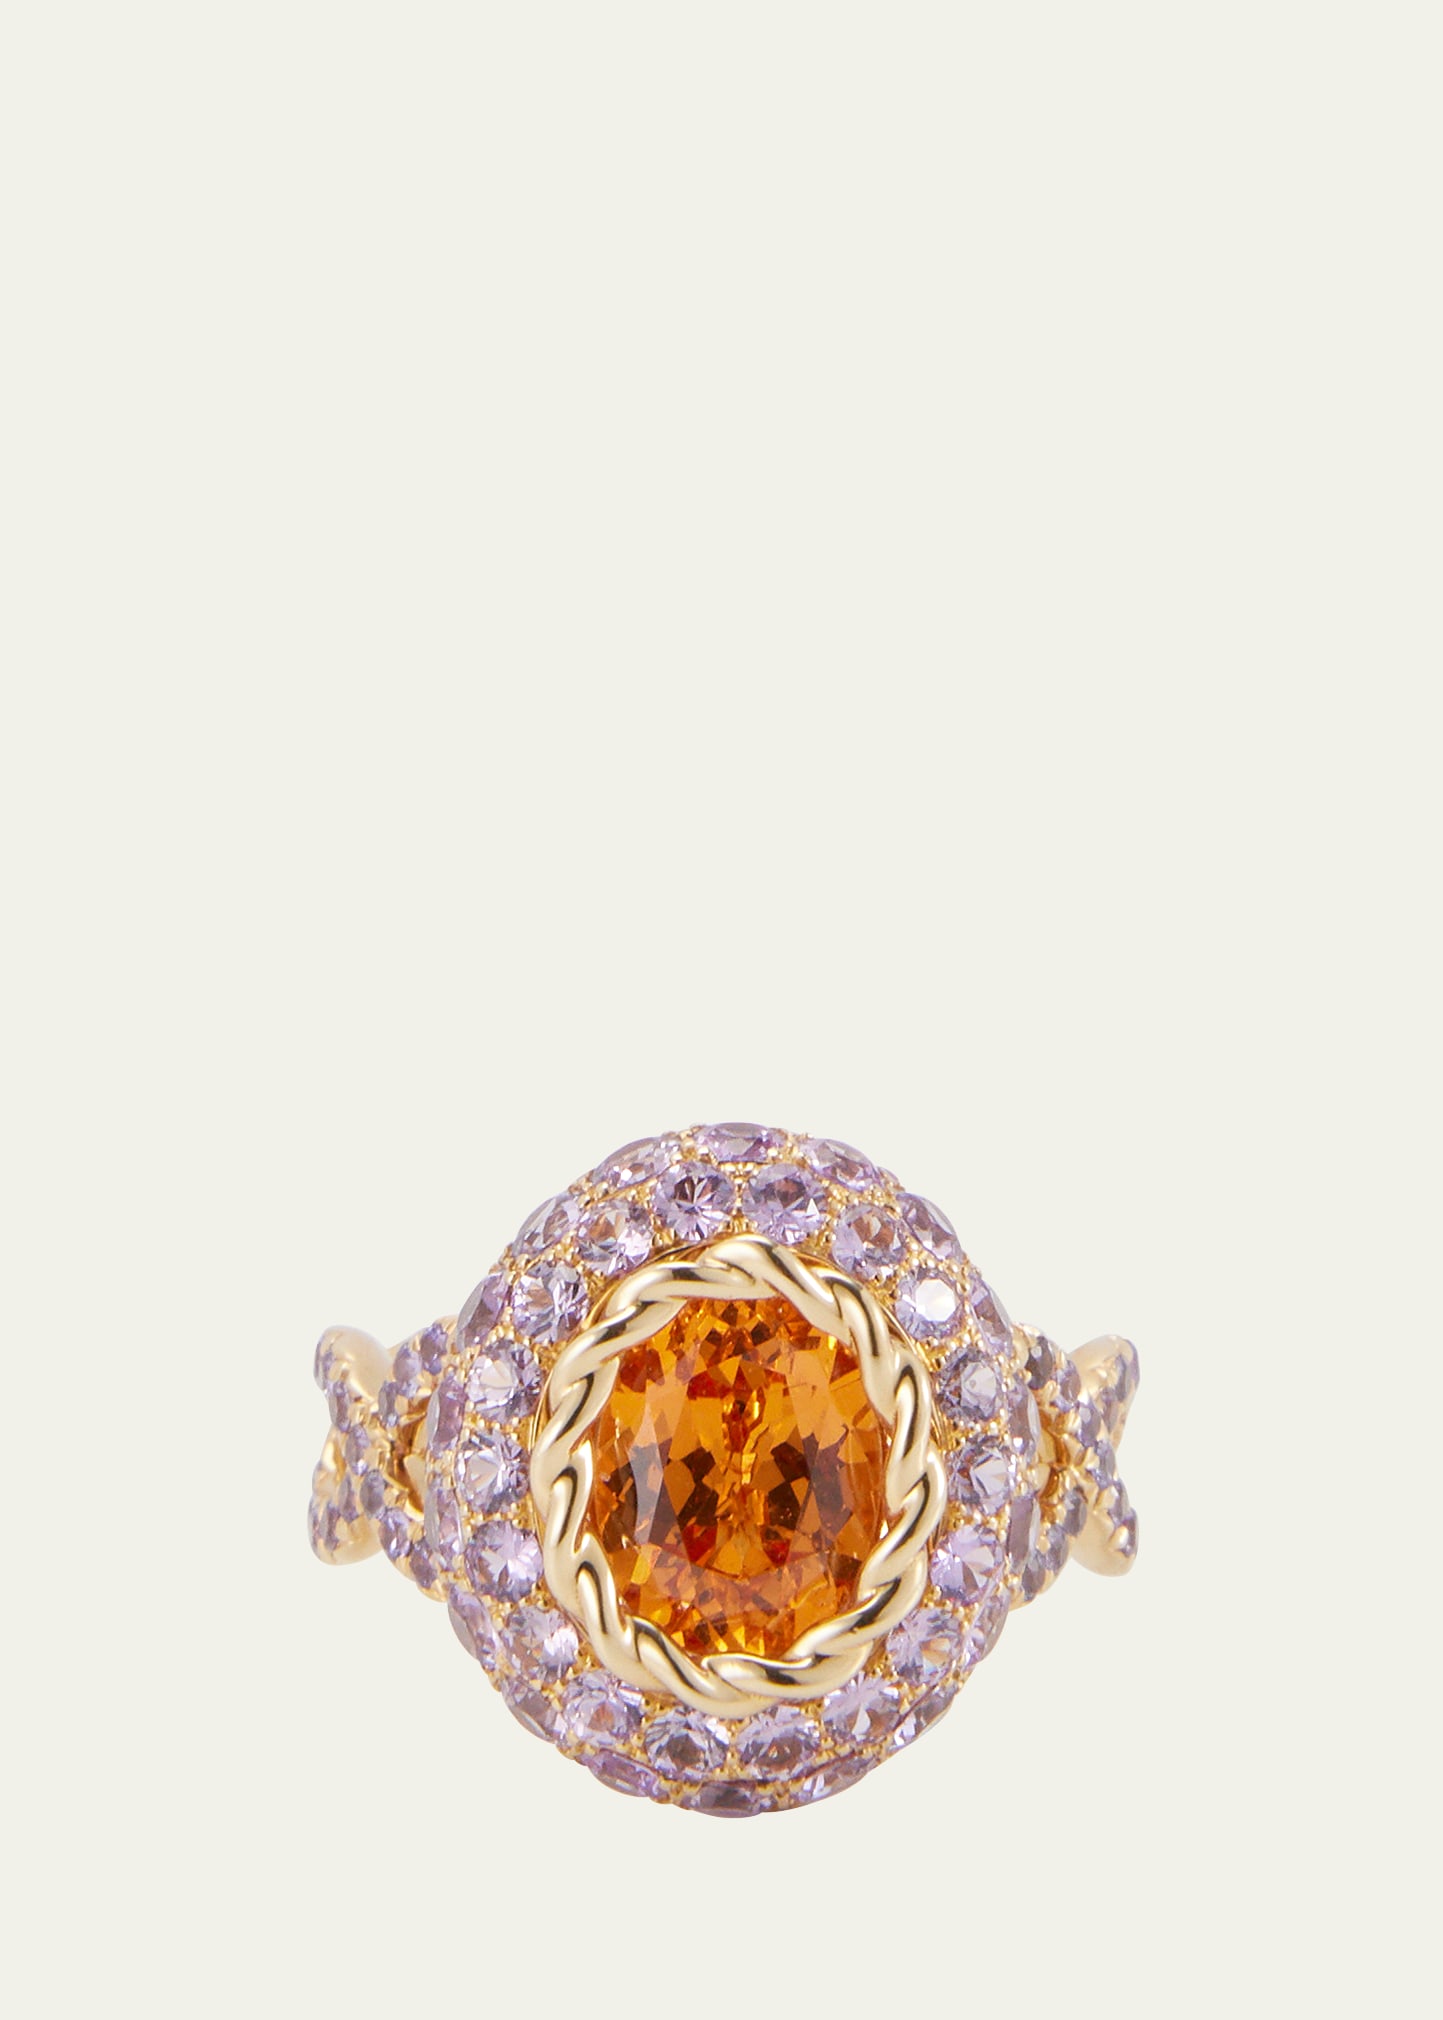 18K Yellow Gold Orange Blossom Ring with Spessarite and Purple Sapphires